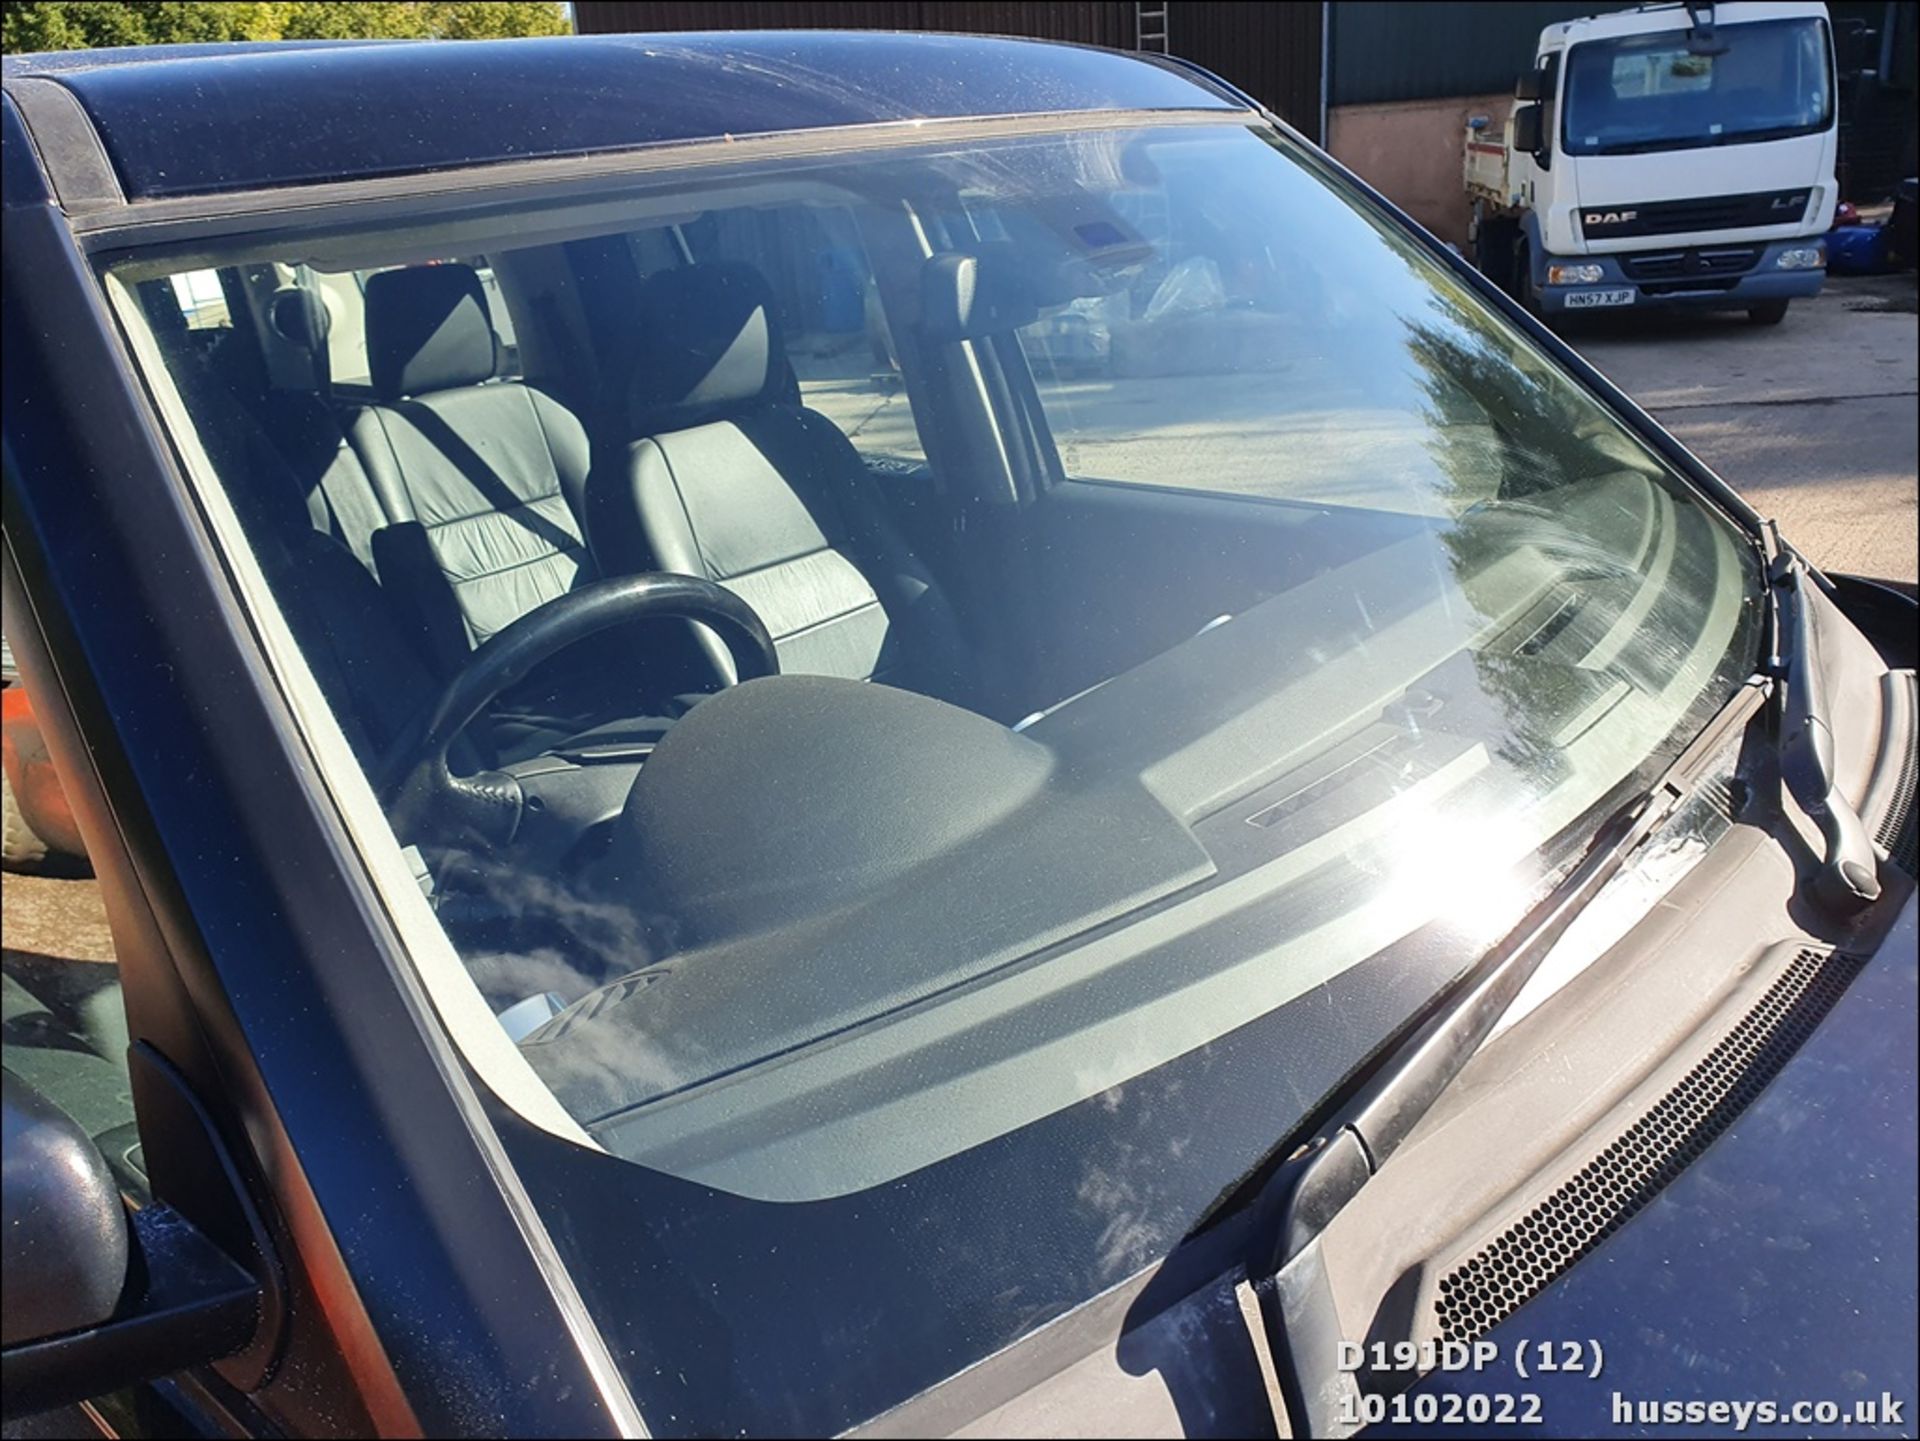 2008 LAND ROVER DISCOVERY TDV6 HSE A - 2720cc 5dr Estate (Blue, 164k) - Image 13 of 36